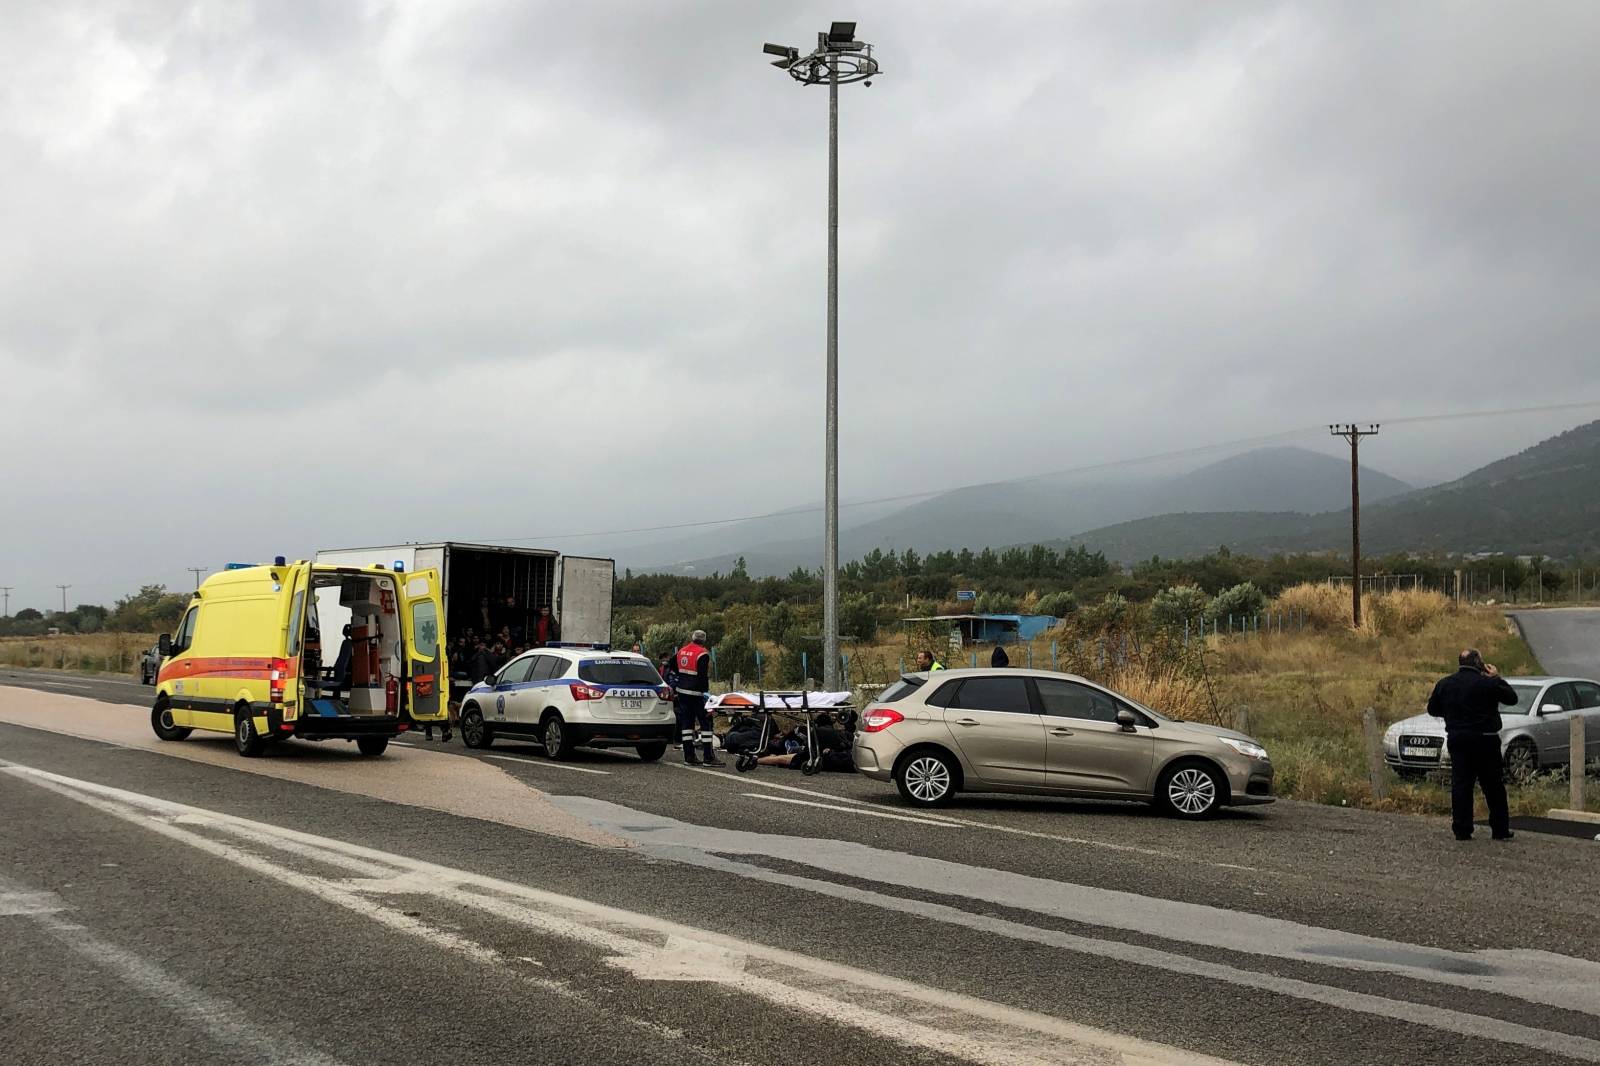 Migrants are seen inside a refrigerated truck found by police, after a check at a motorway near Xanthi